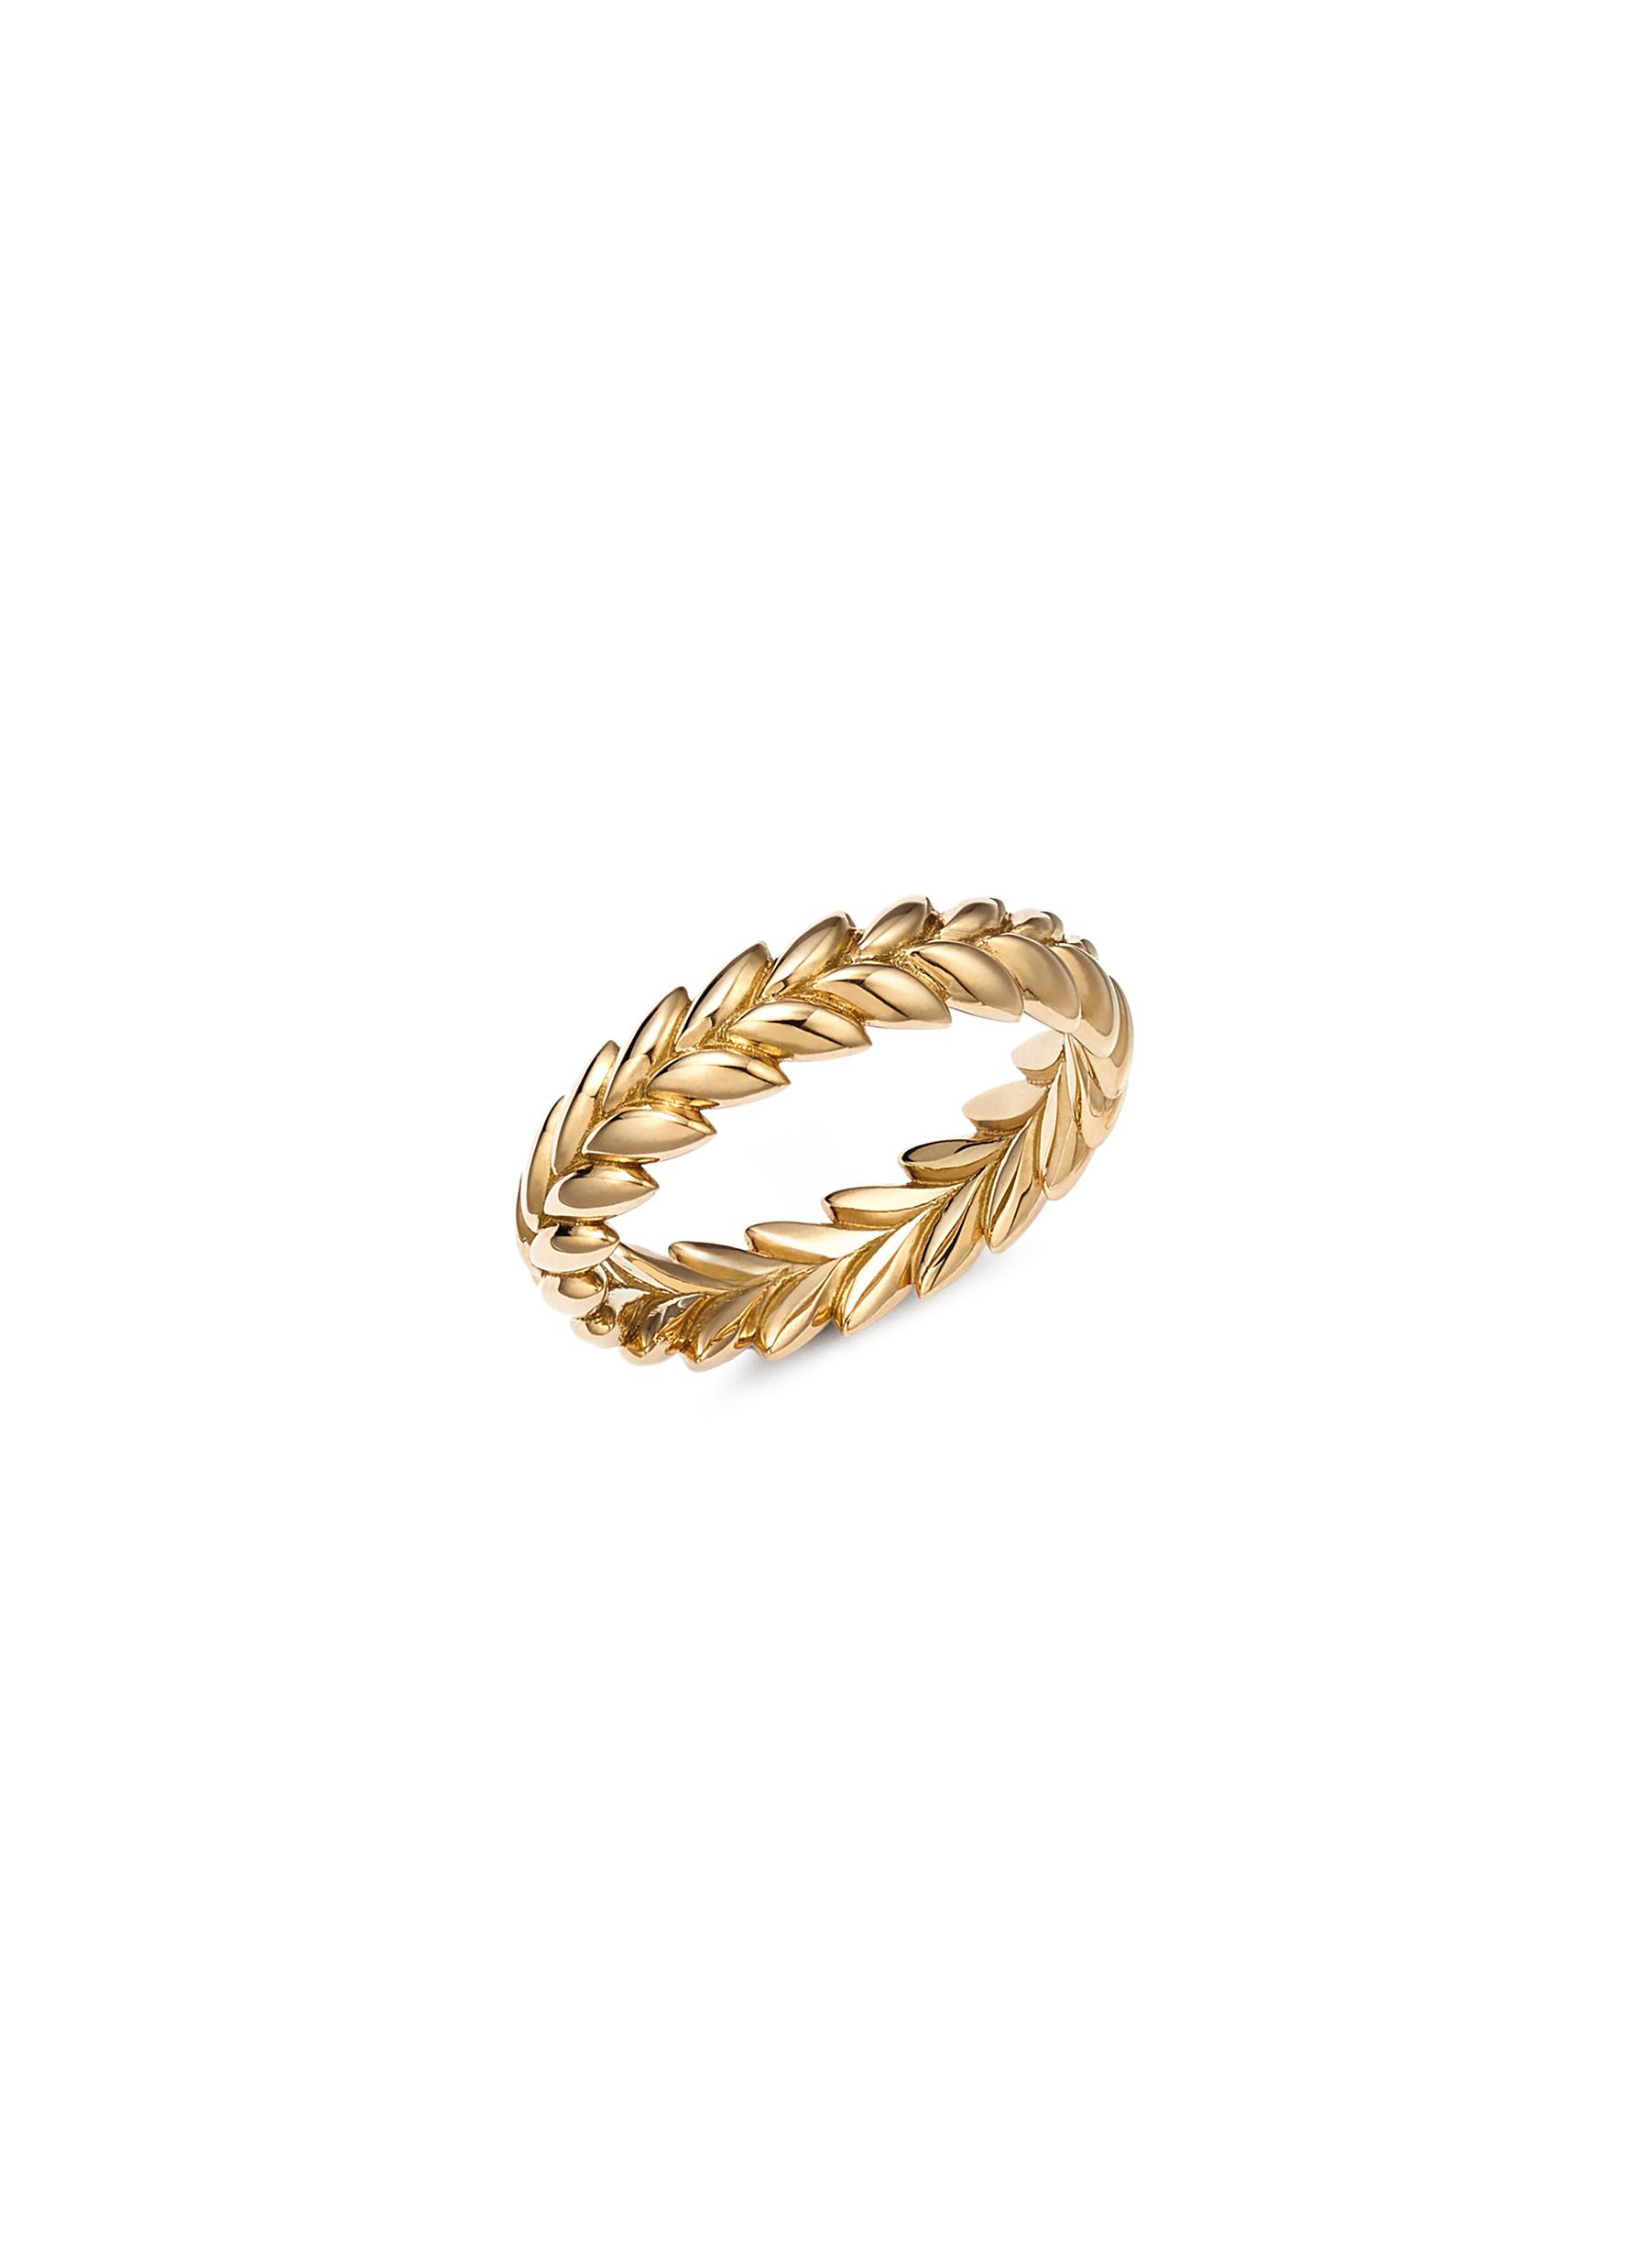 FUTURA 'ETHEREAL' 18K FAIRMINED ECOLOGICAL GOLD RING